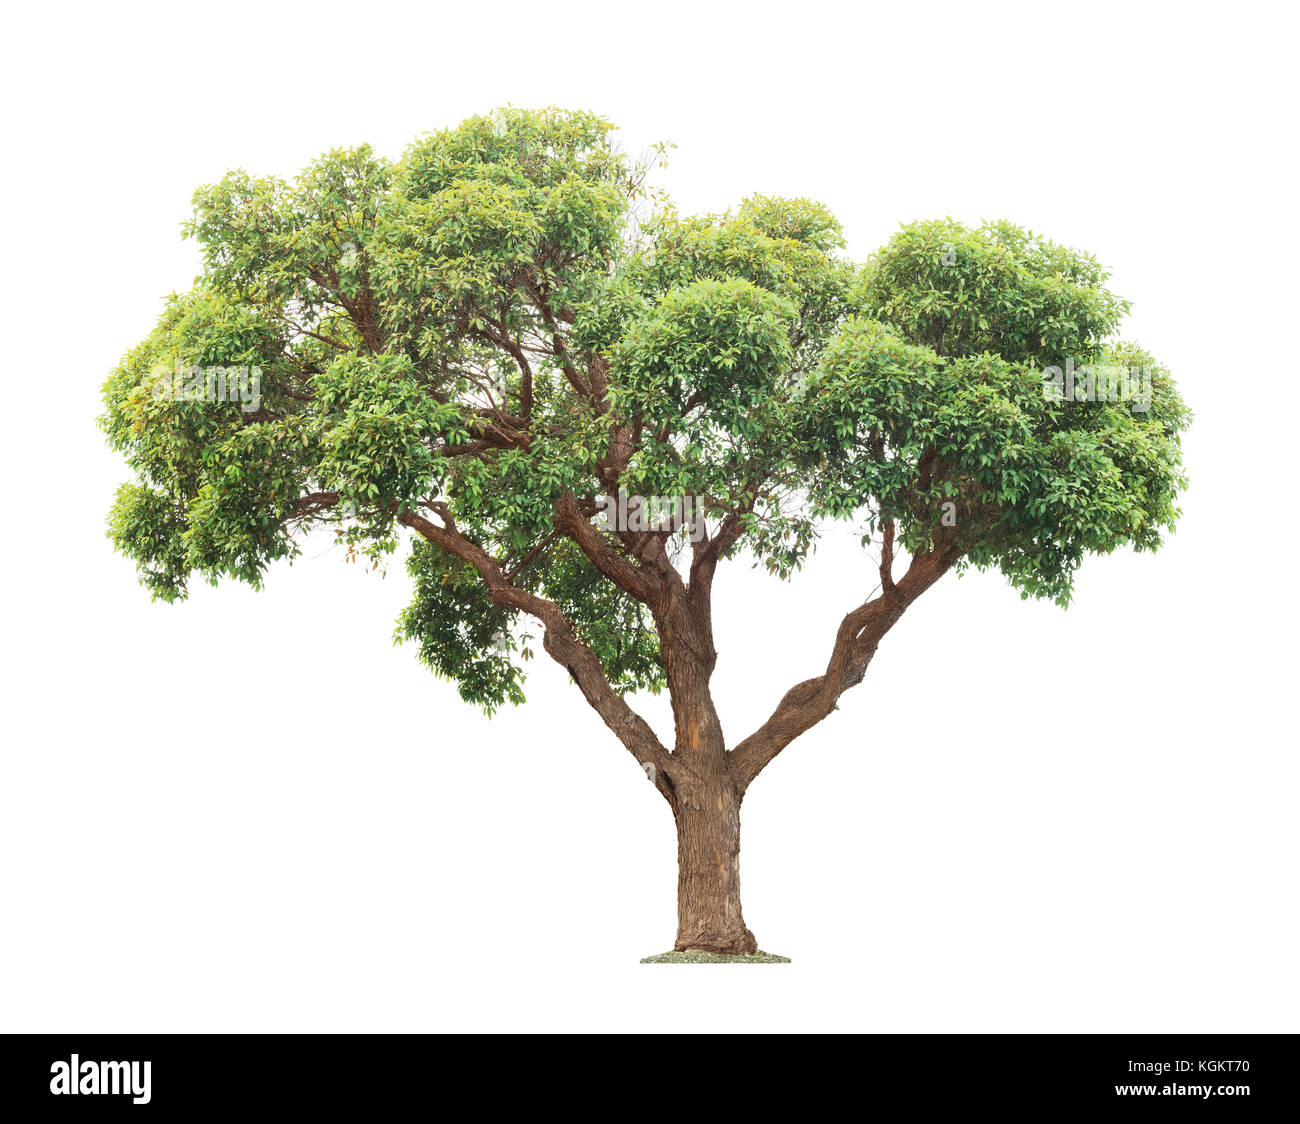 Green and yellow beautiful big tree isolated on white background Stock Photo